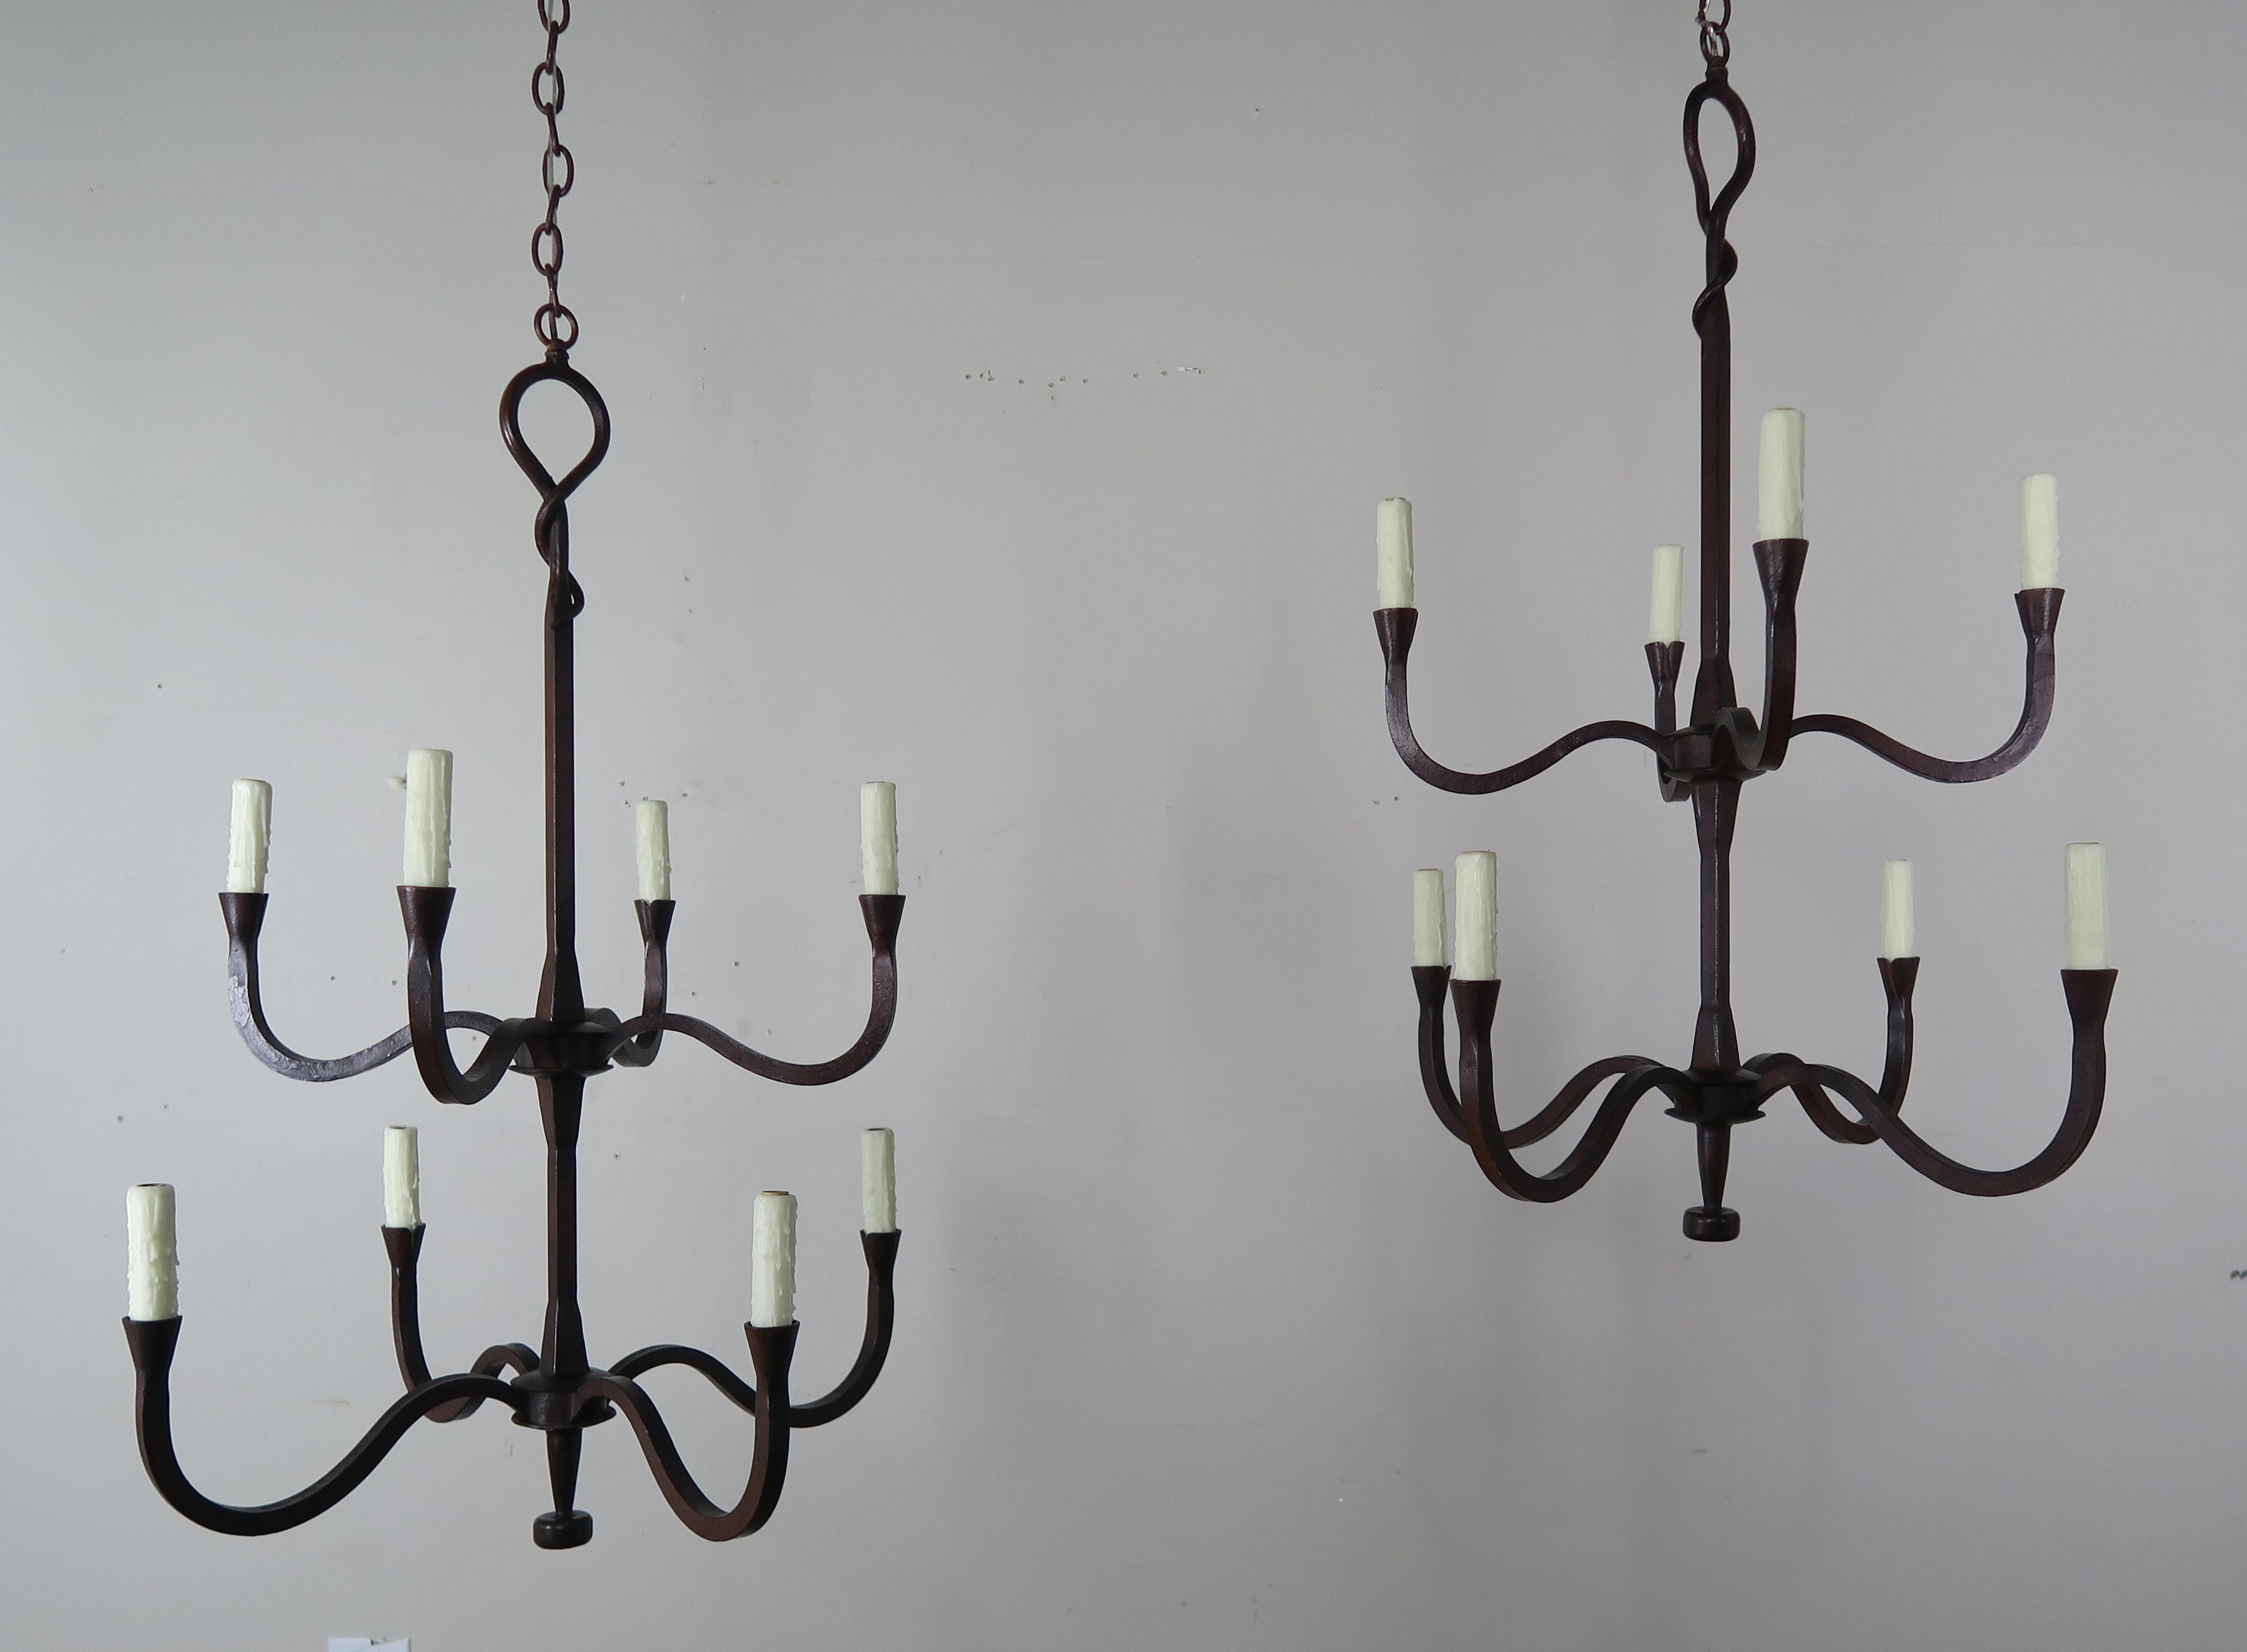 Two-tier eight light Spanish style handwrought iron chandelier finished in an antique iron finish. The chandelier is newly wired with cream drip wax candle covers. The chandelier is made in two sizes but any size or custom finish can be done per